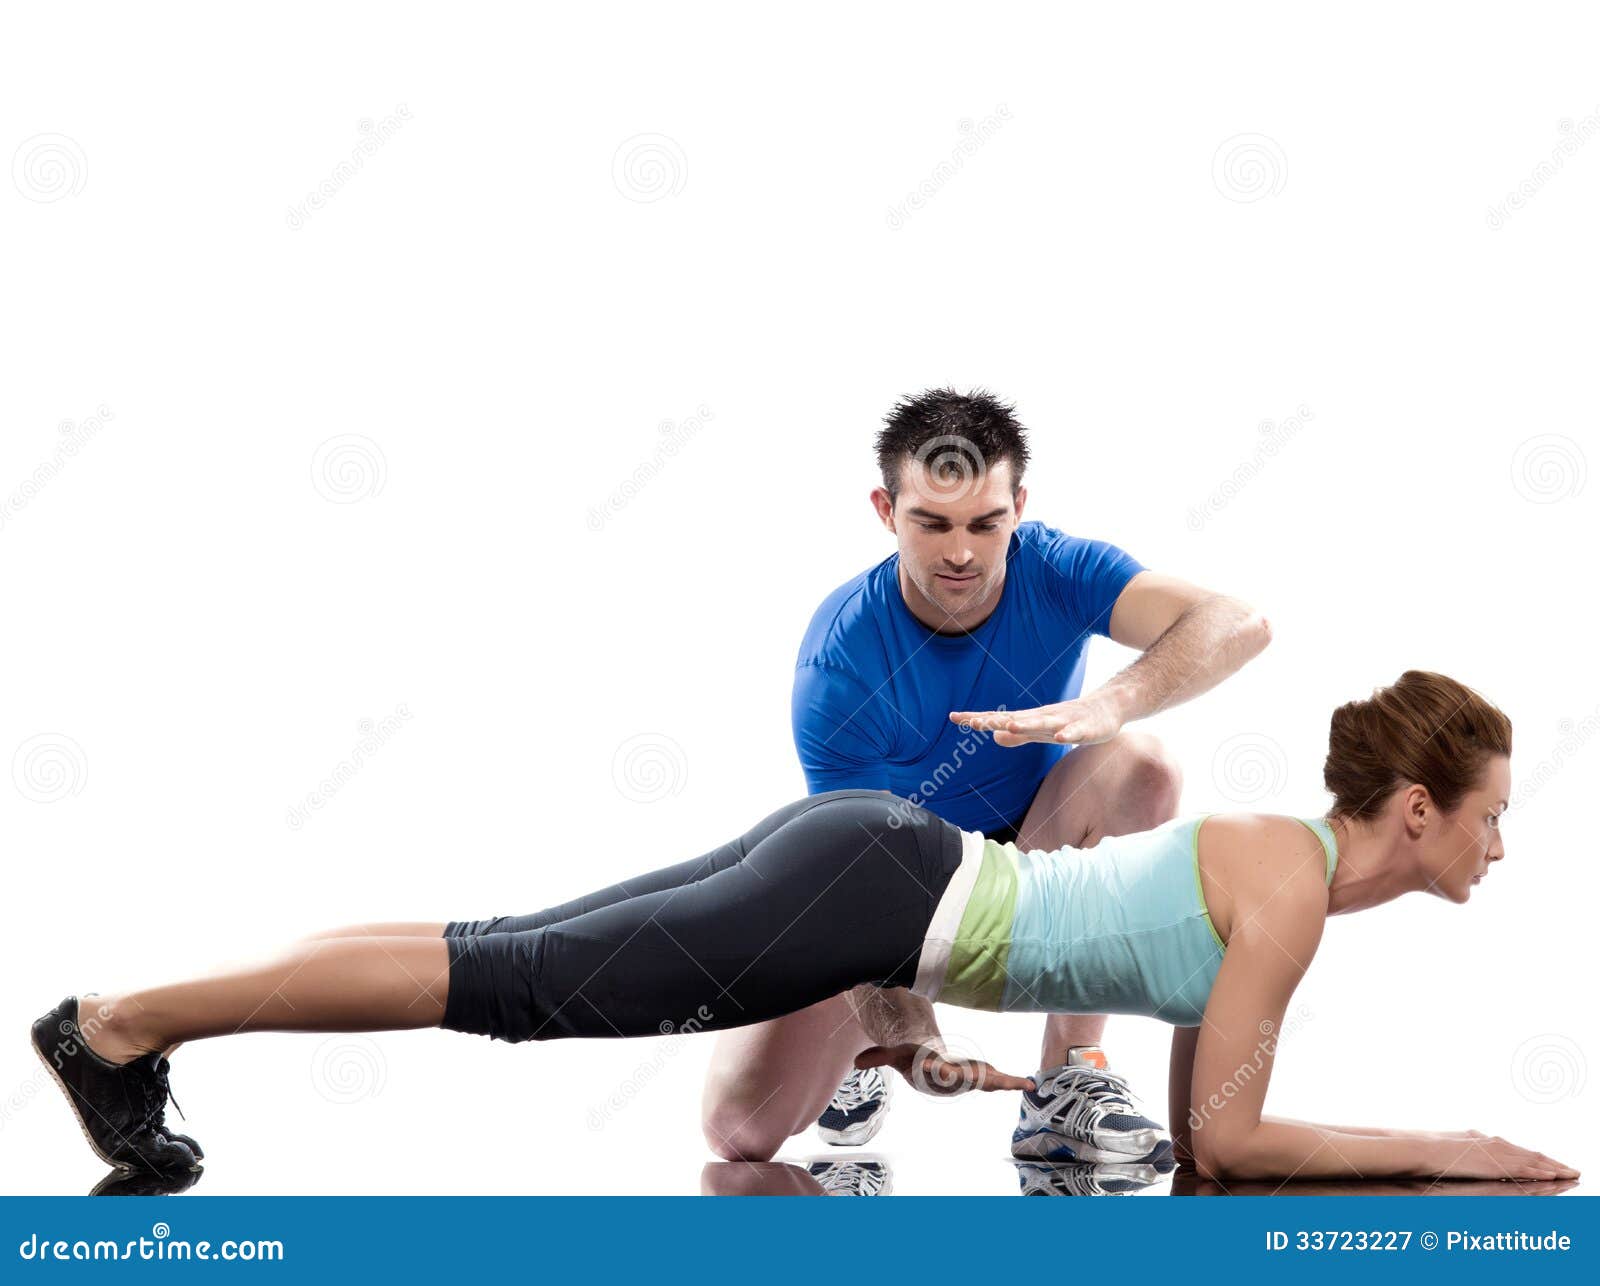 man aerobic trainer positioning woman workout